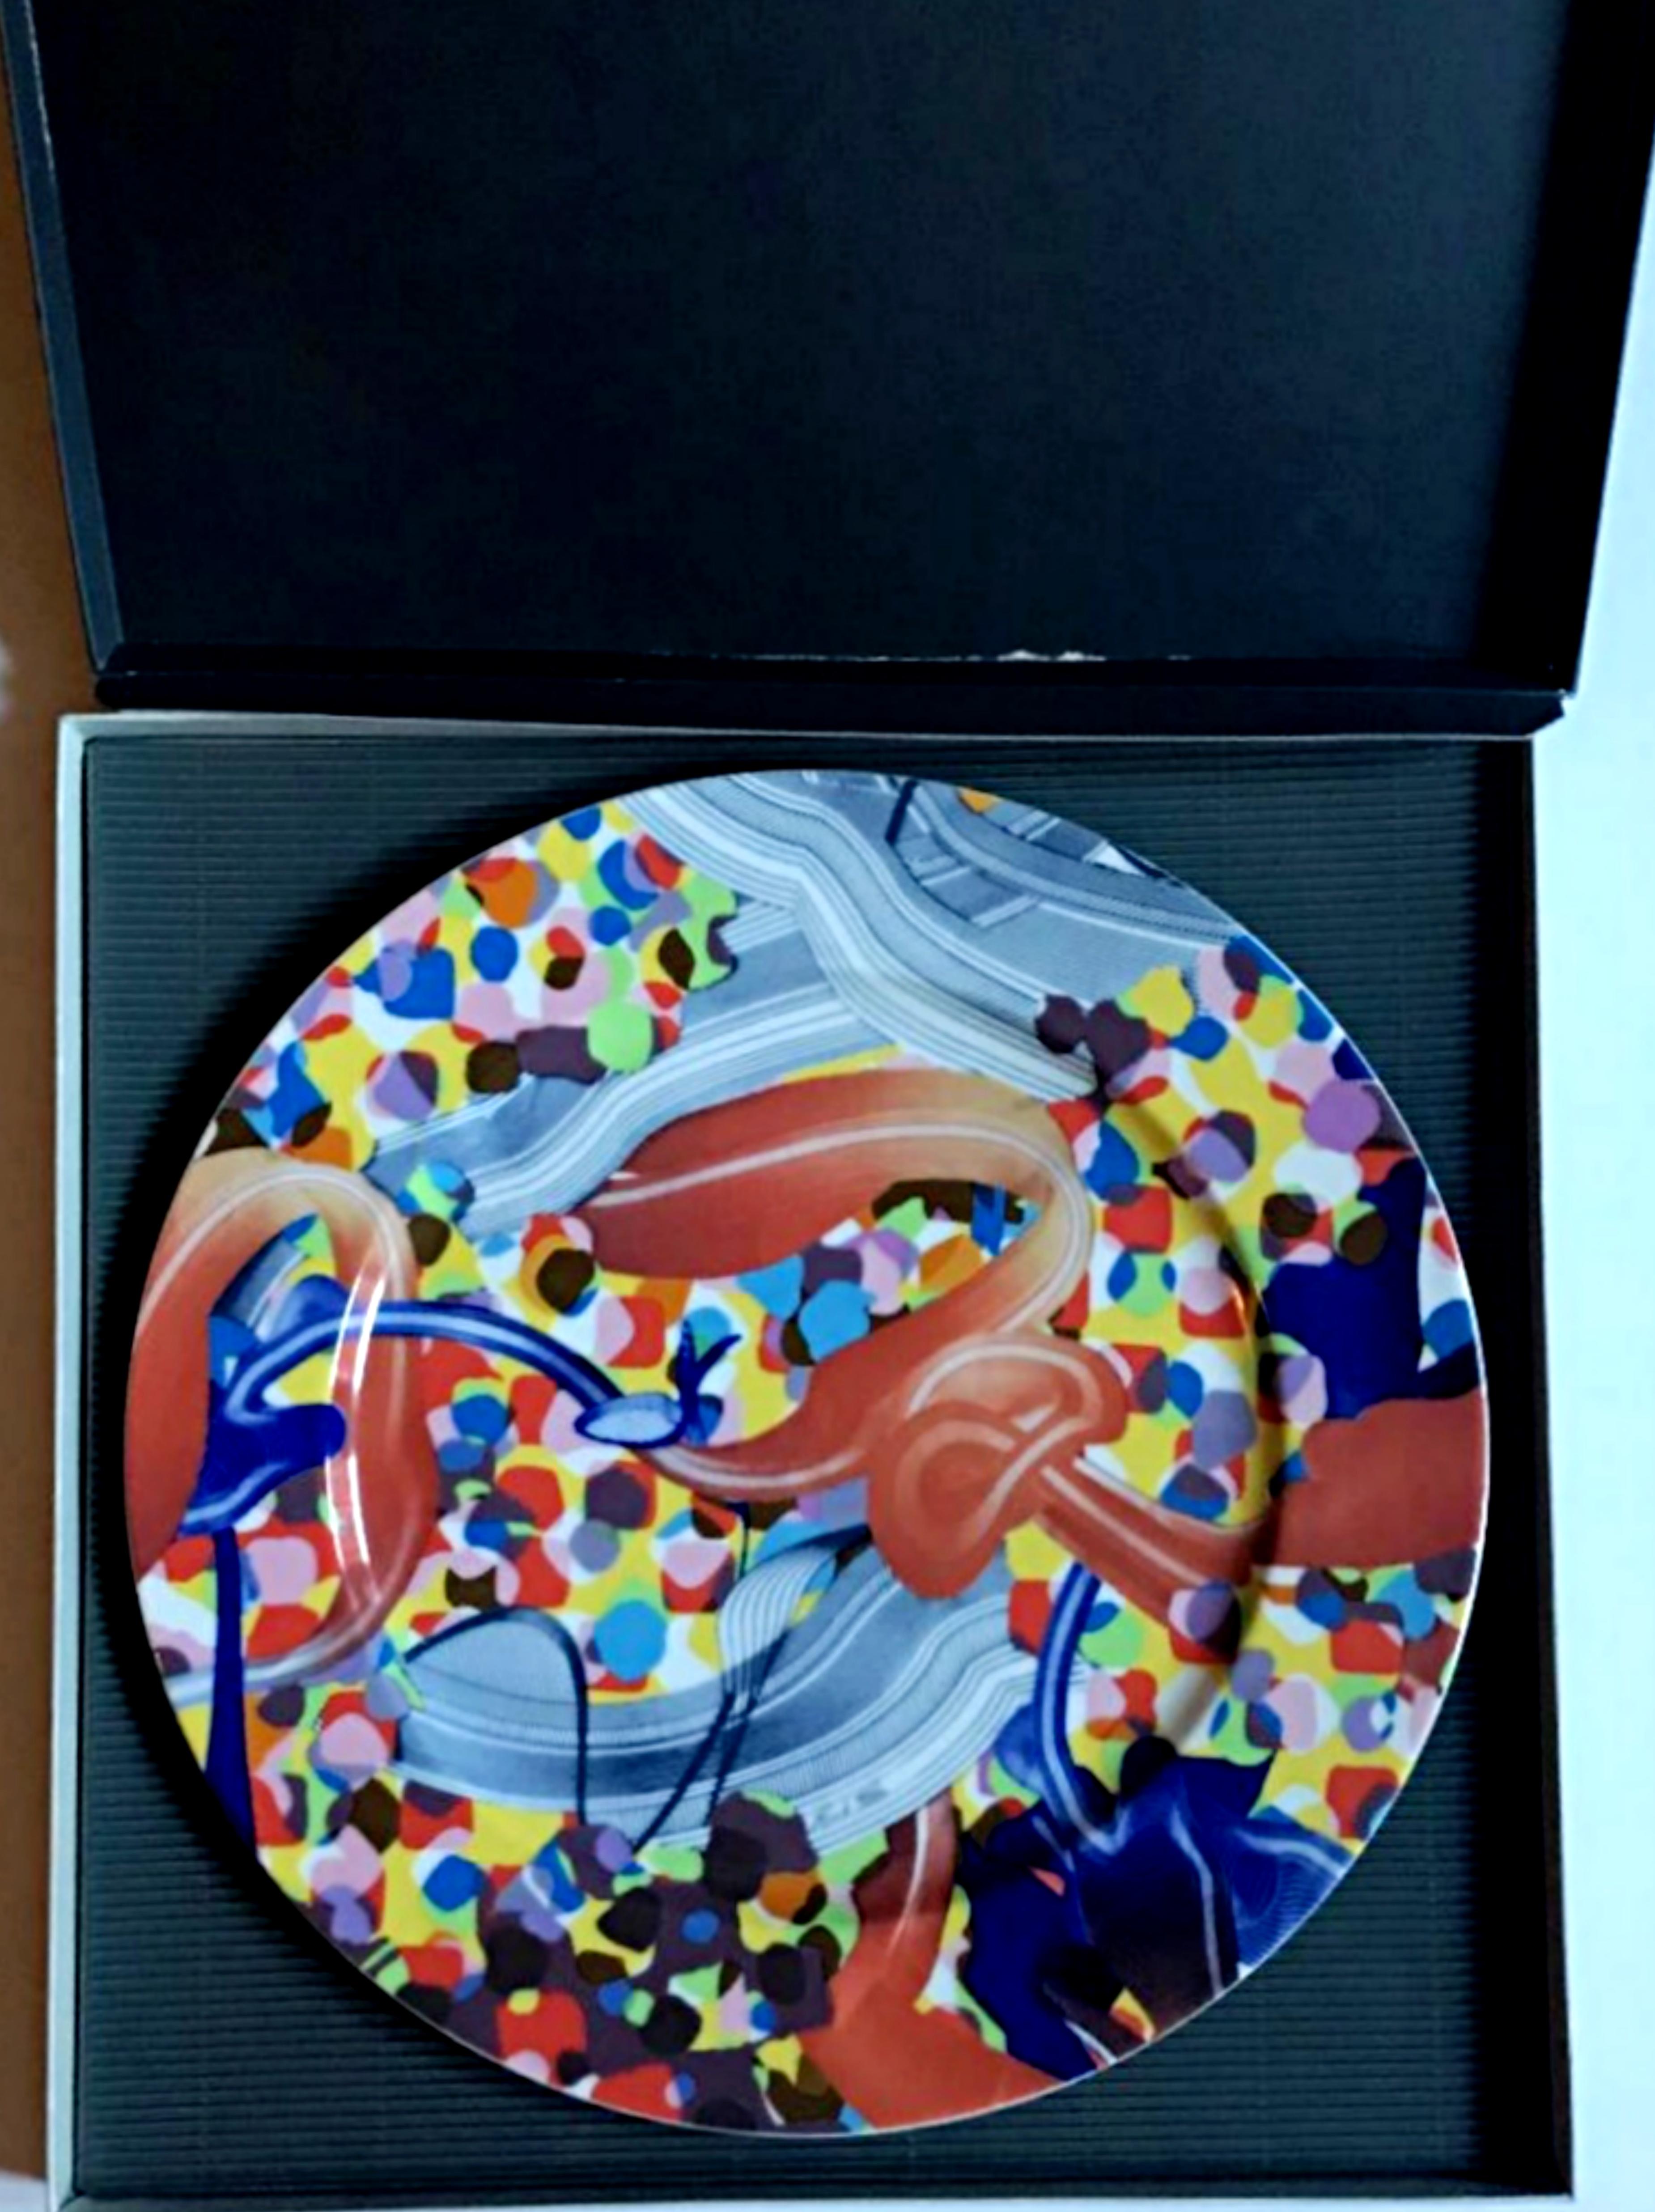 Porcelain Plate of Princess of Wales Theatre ceiling design (Limited Edition) - Abstract Expressionist Mixed Media Art by Frank Stella